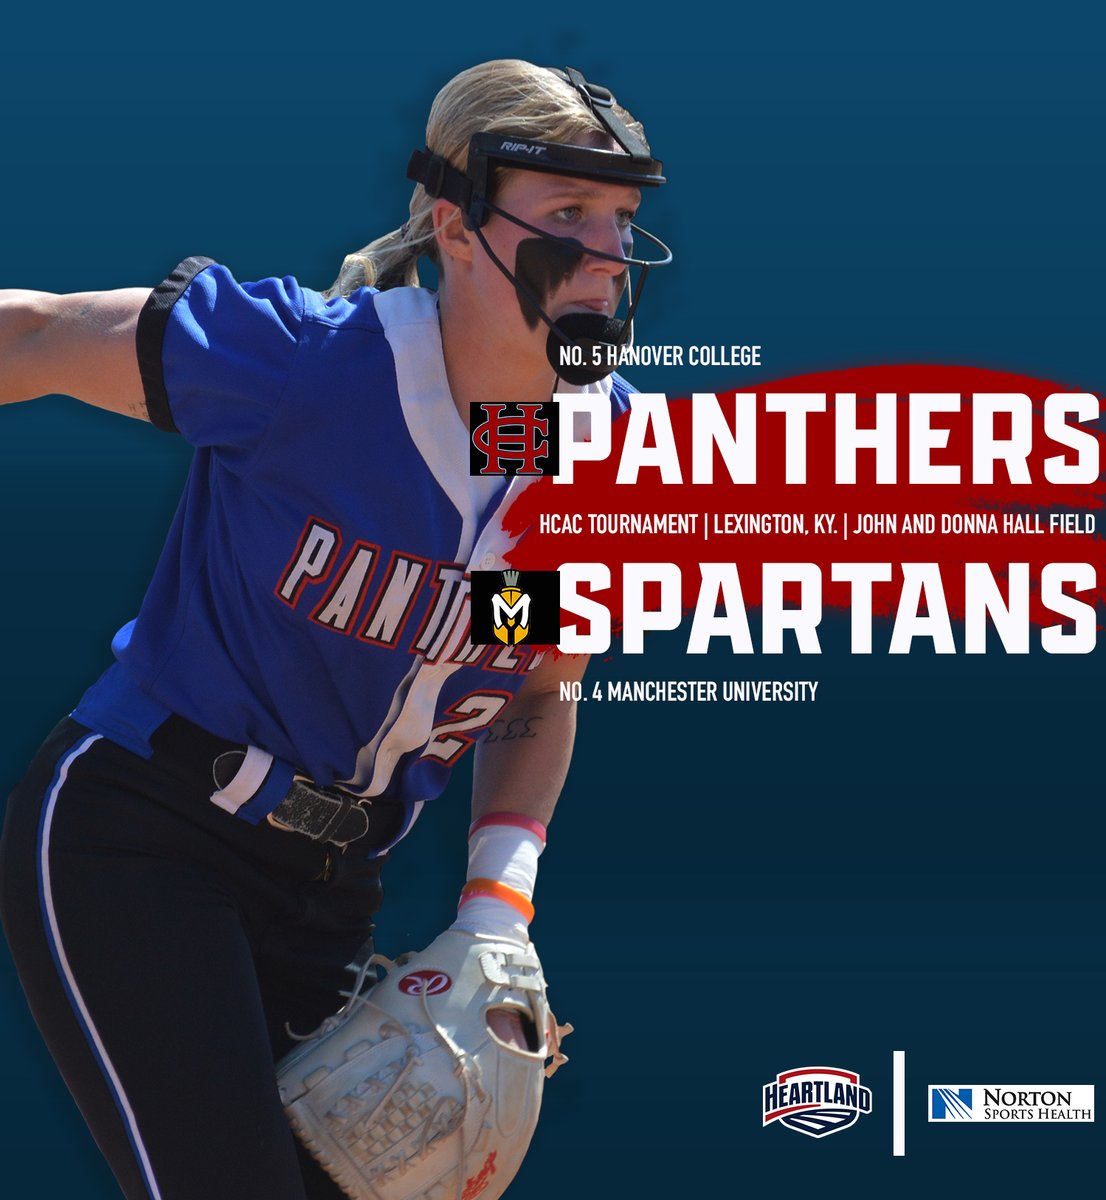 SB | The quest for an HCAC Tournament title begins today as the Panthers hit the road for Lexington! #StripeStandard 

📍Transylvania 
🆚 no. 4 seed Manchester 
🥎 10:00 AM
🎥 ow.ly/lrAU50OkGGG
📊 ow.ly/QMM950OkGGI